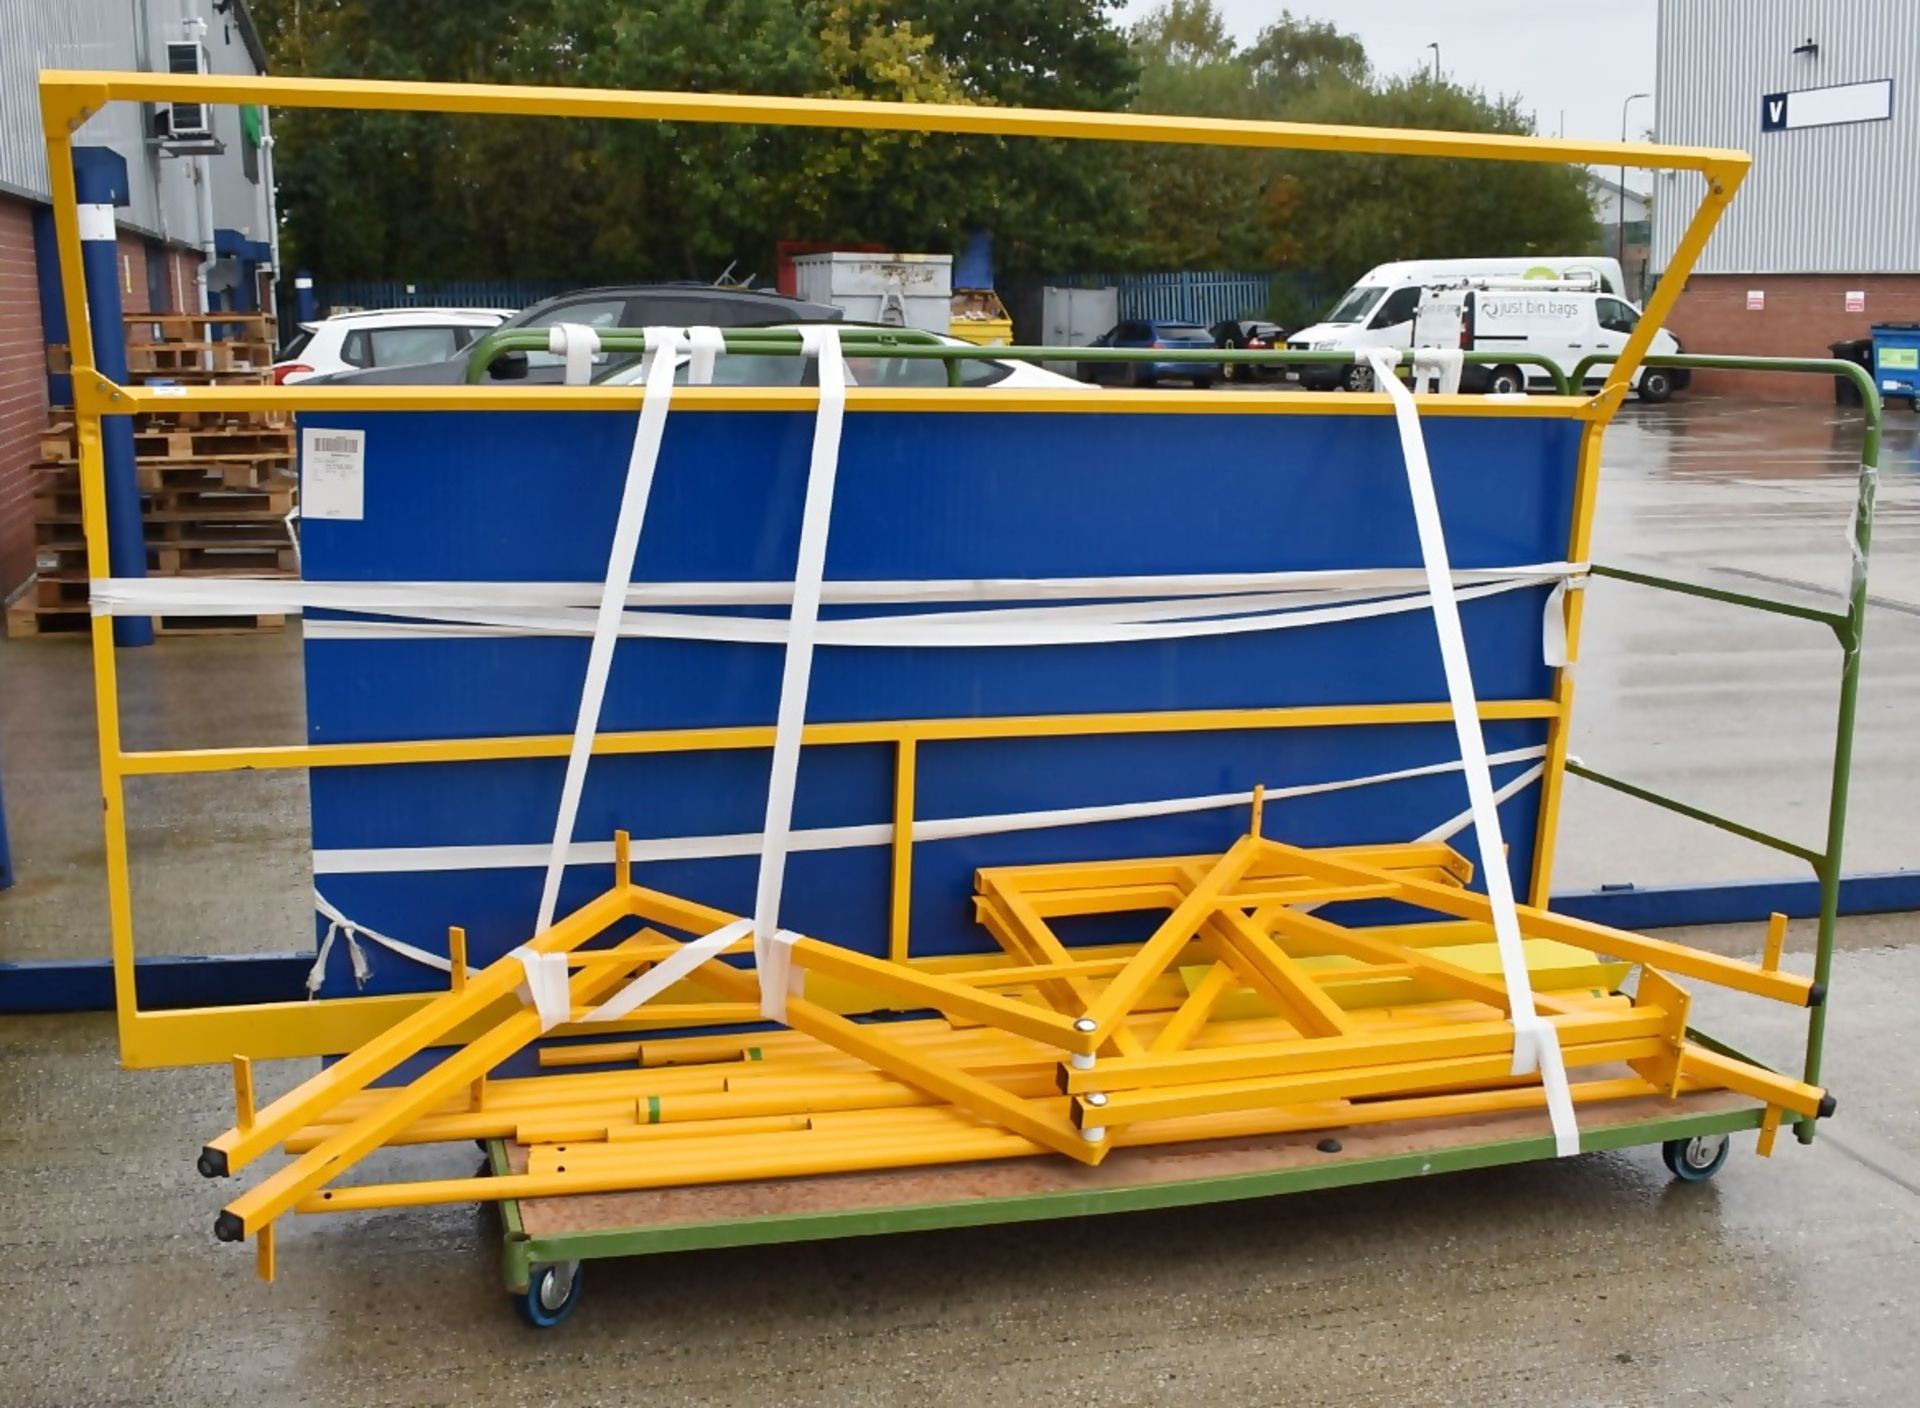 1 x Site Services Ramp Panels & Safety Gate